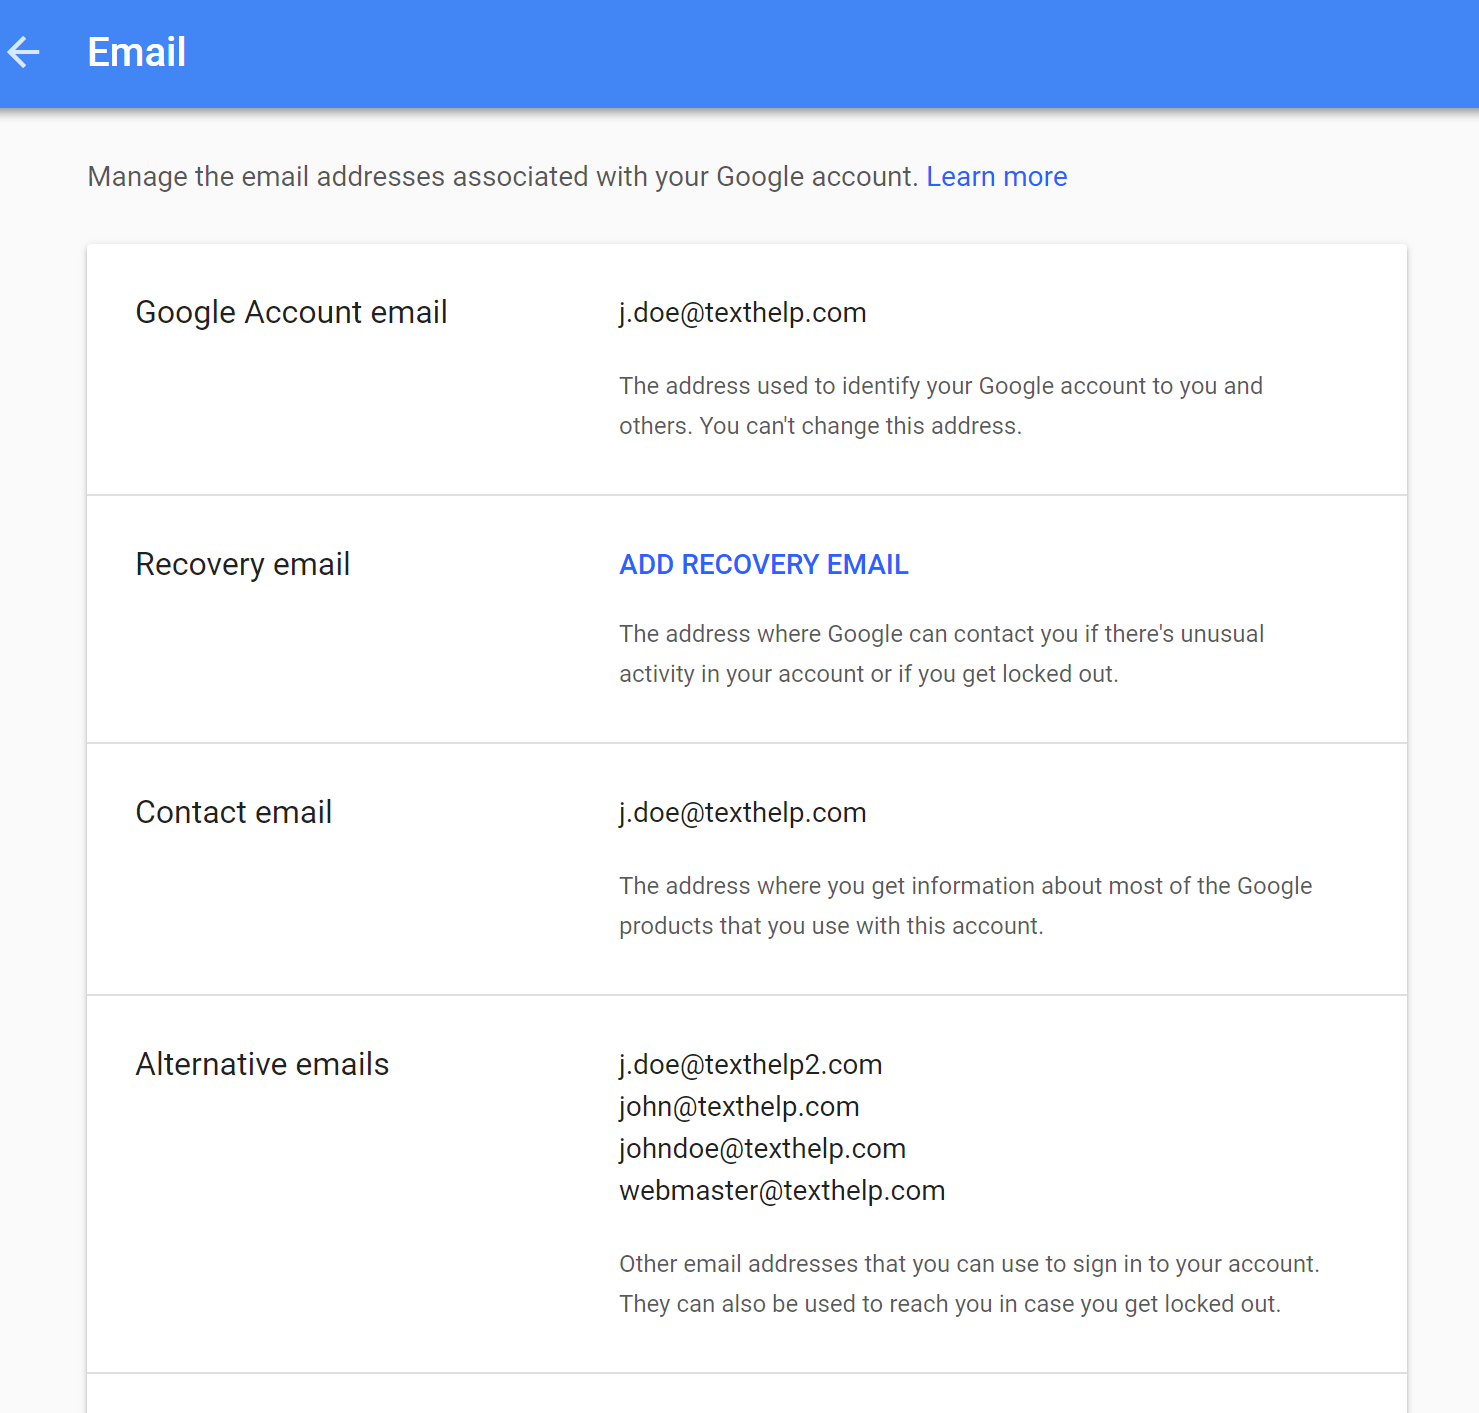 Google Account emails